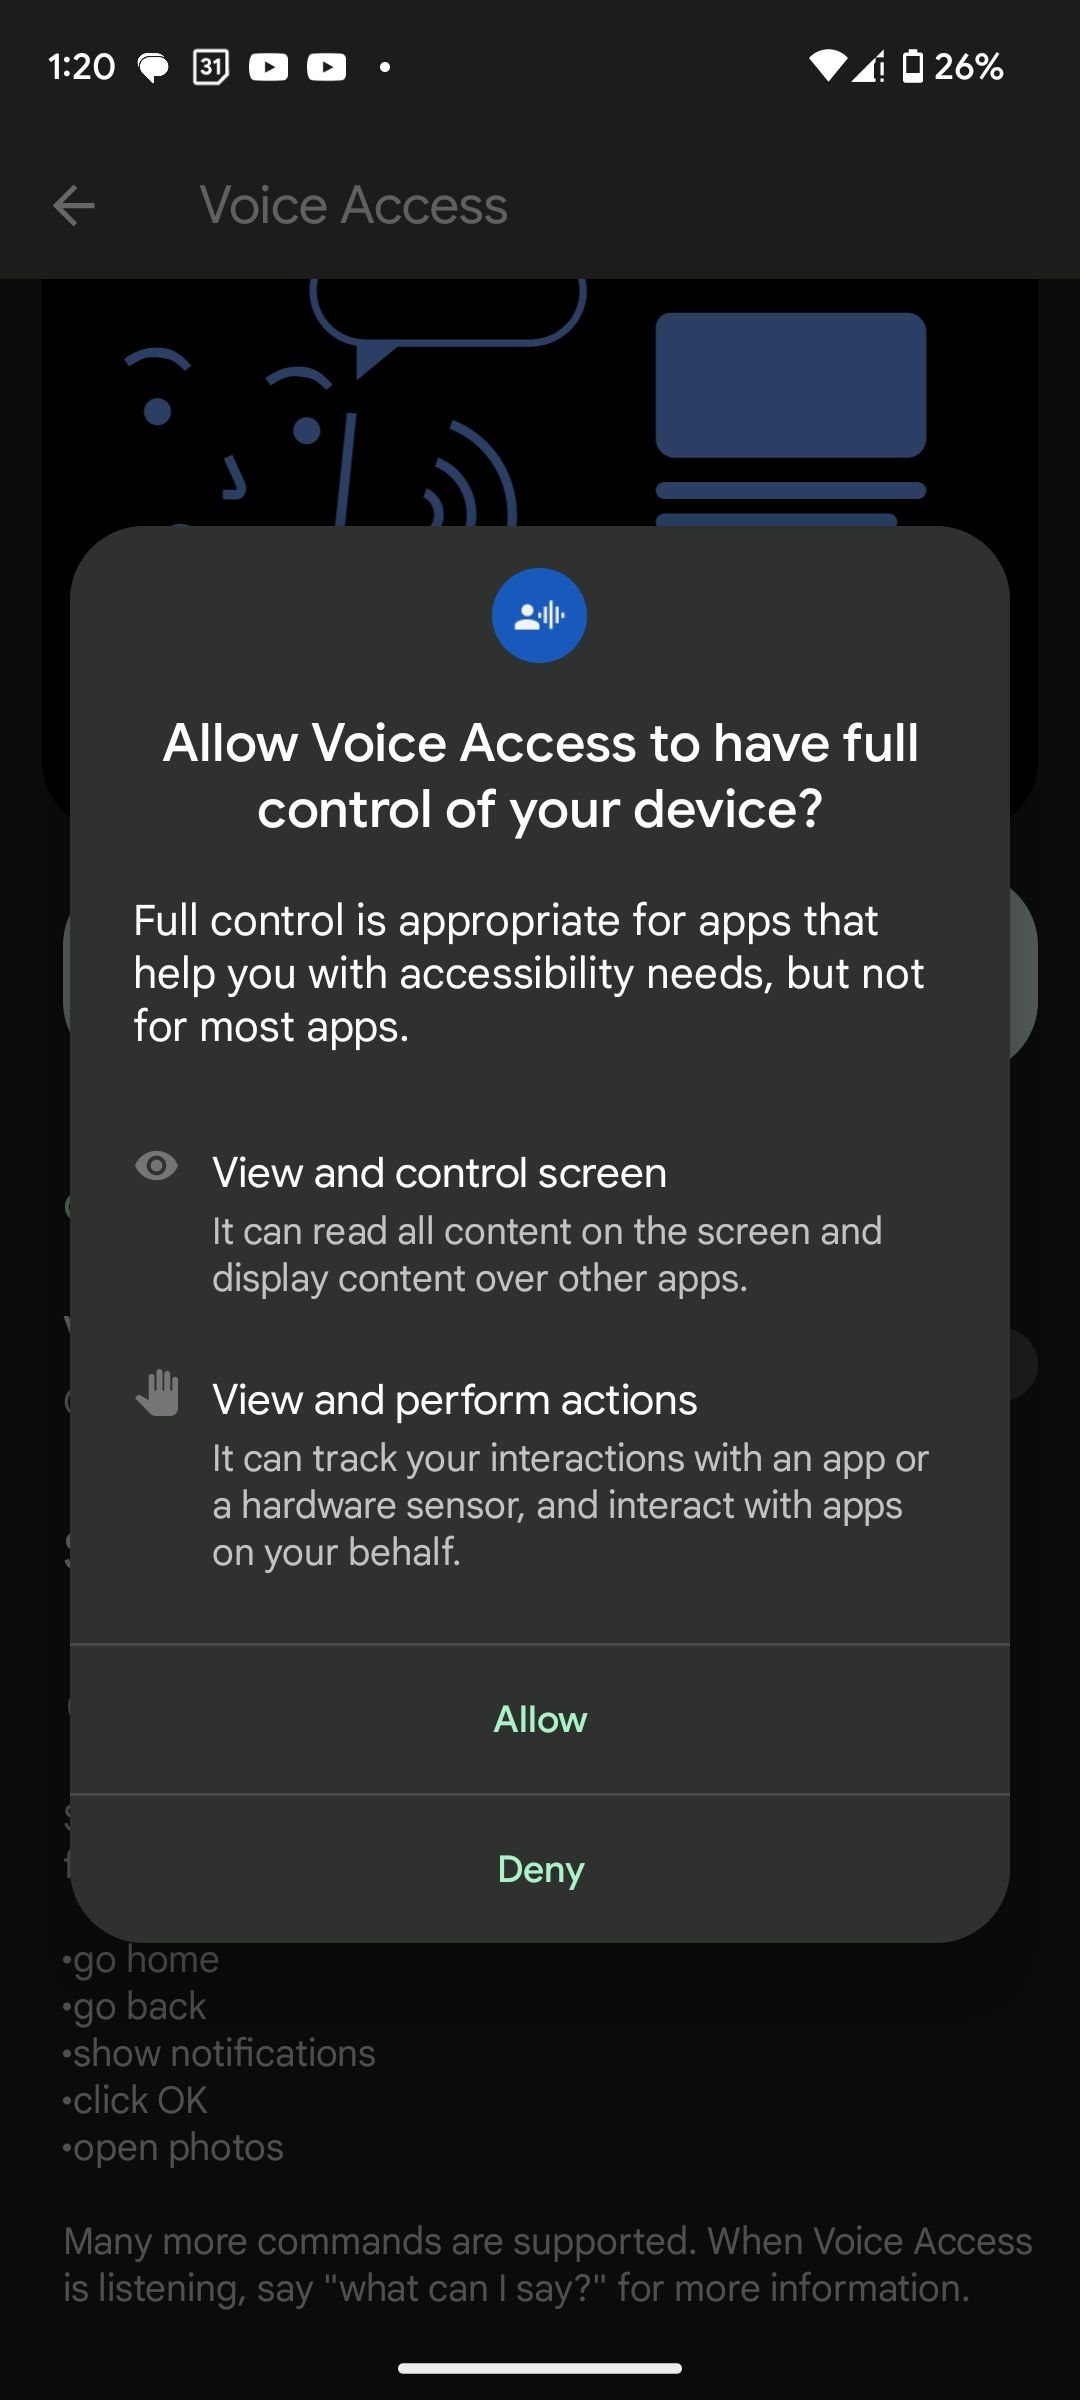 Enabling Voice Access features in Android